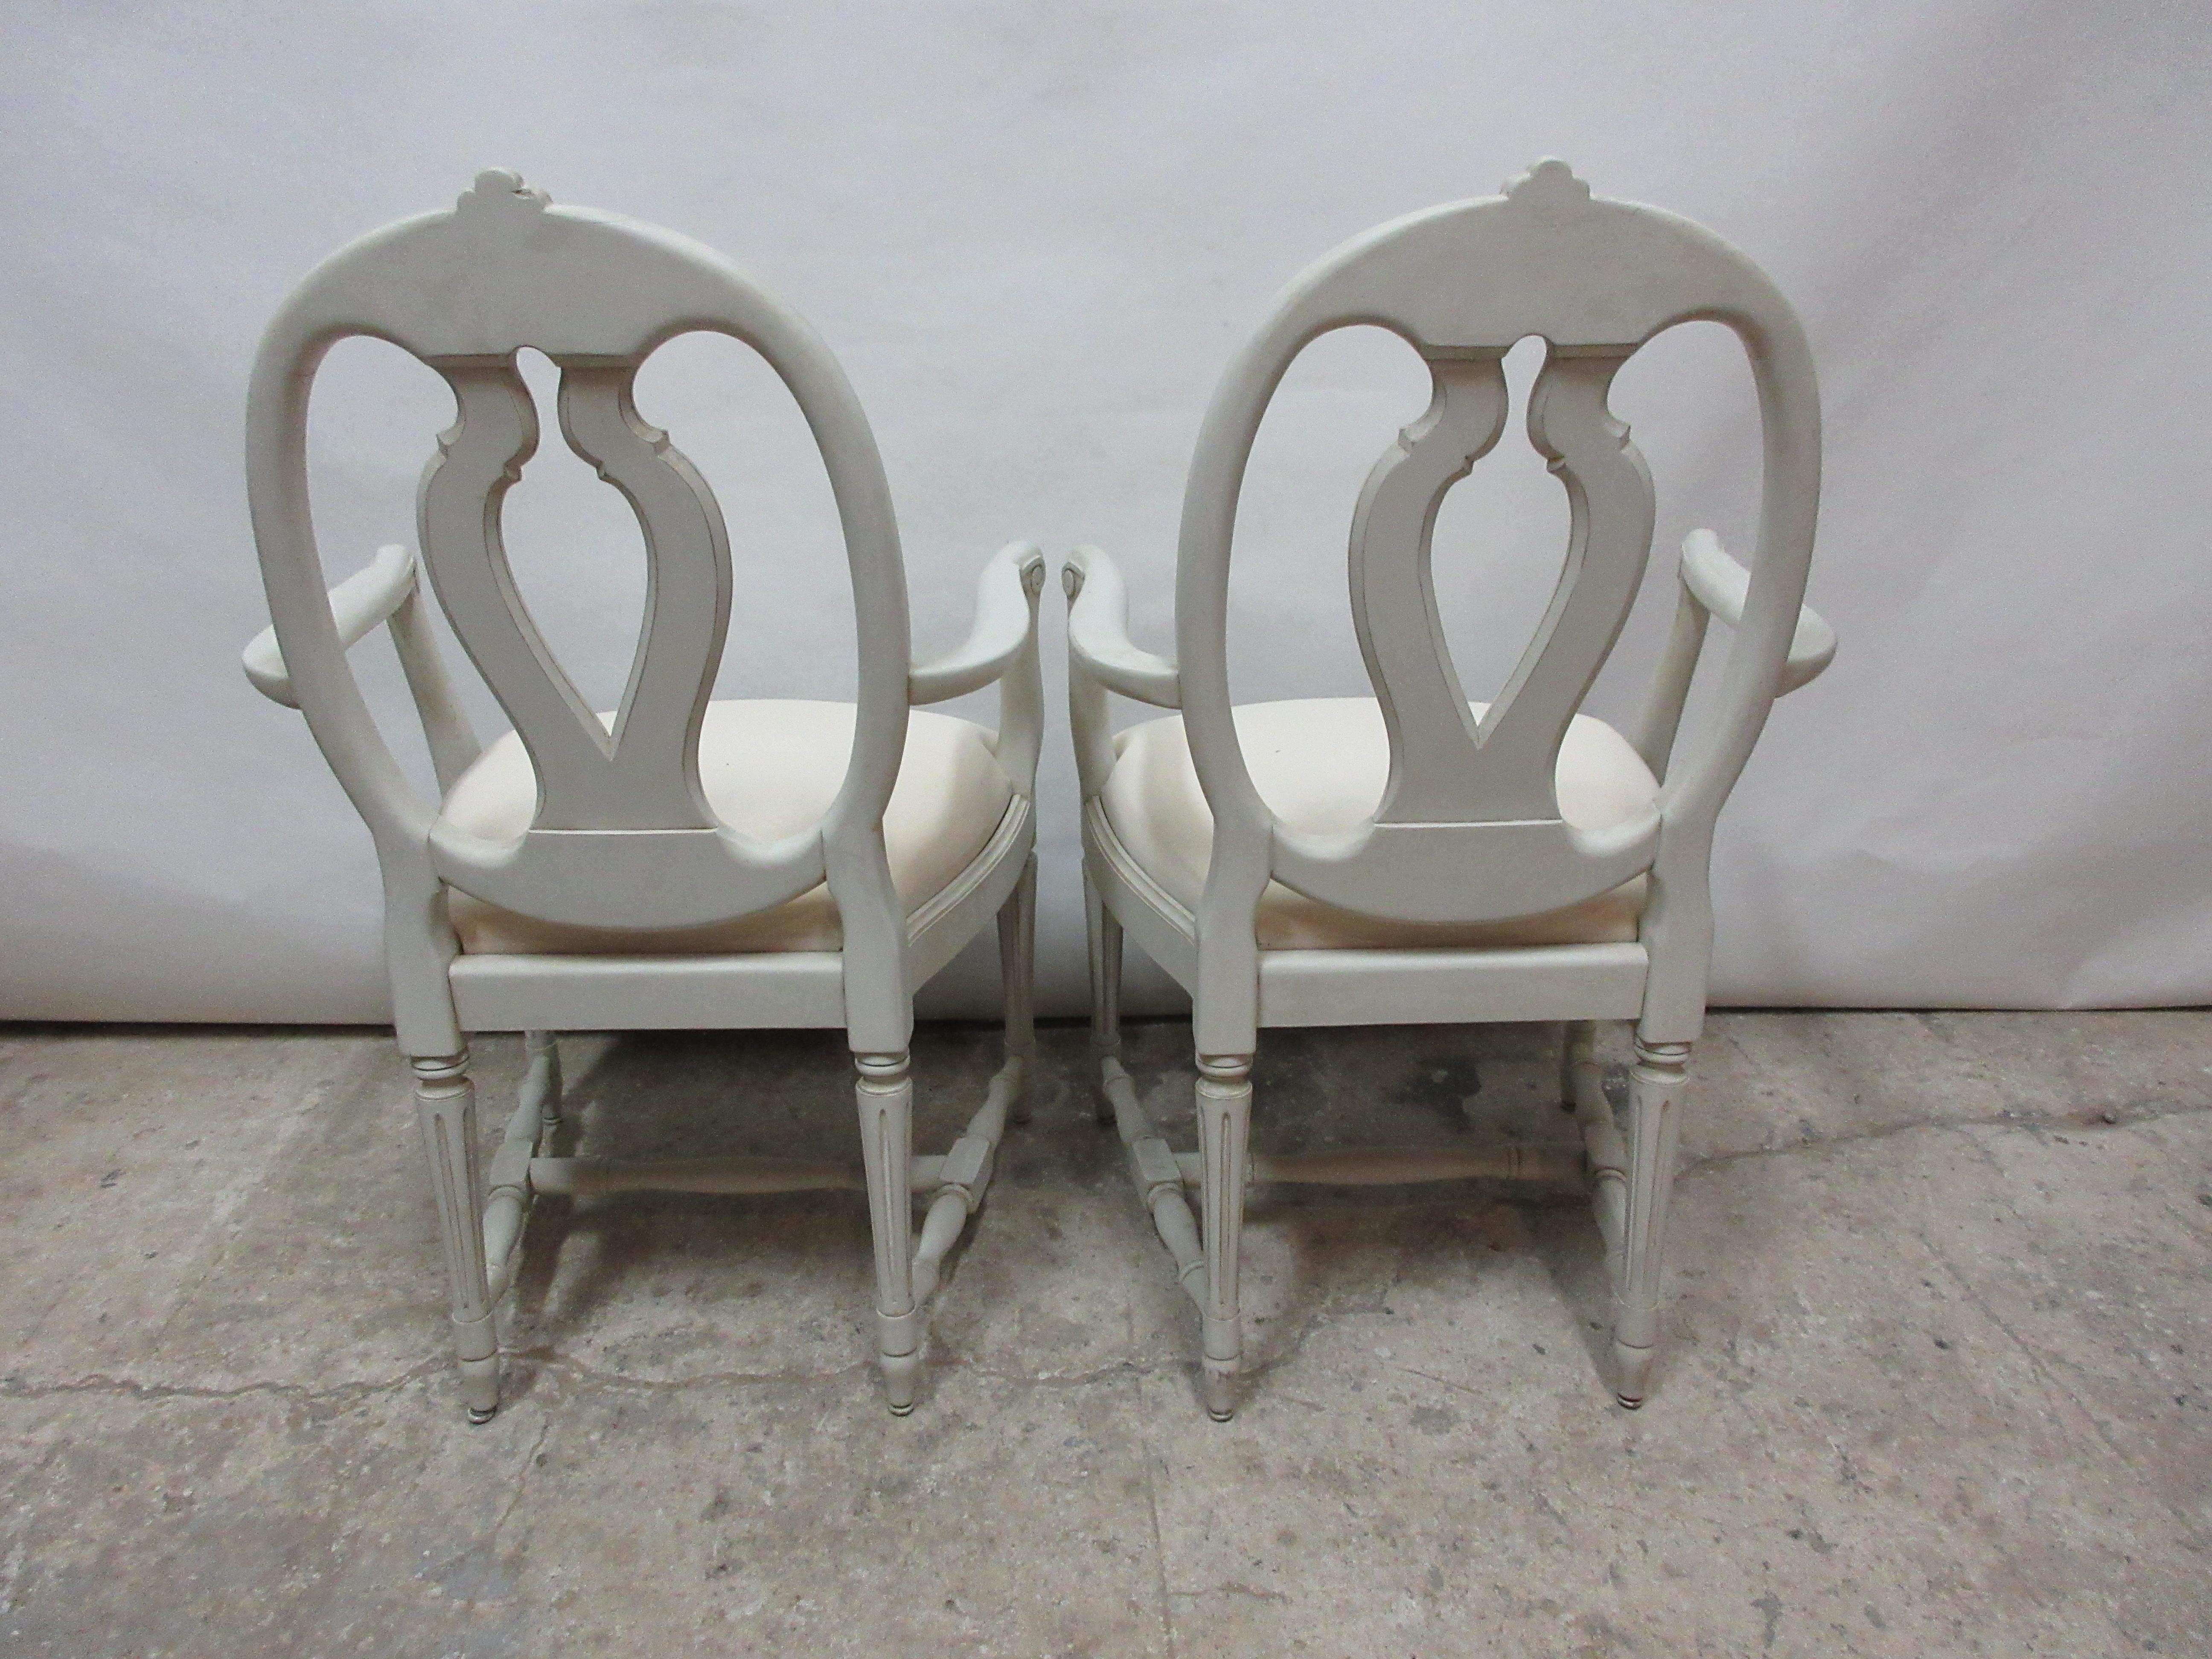 This is a set of 2 Swedish Gustavian armchairs . They have been restored and repainted with Milk paints 